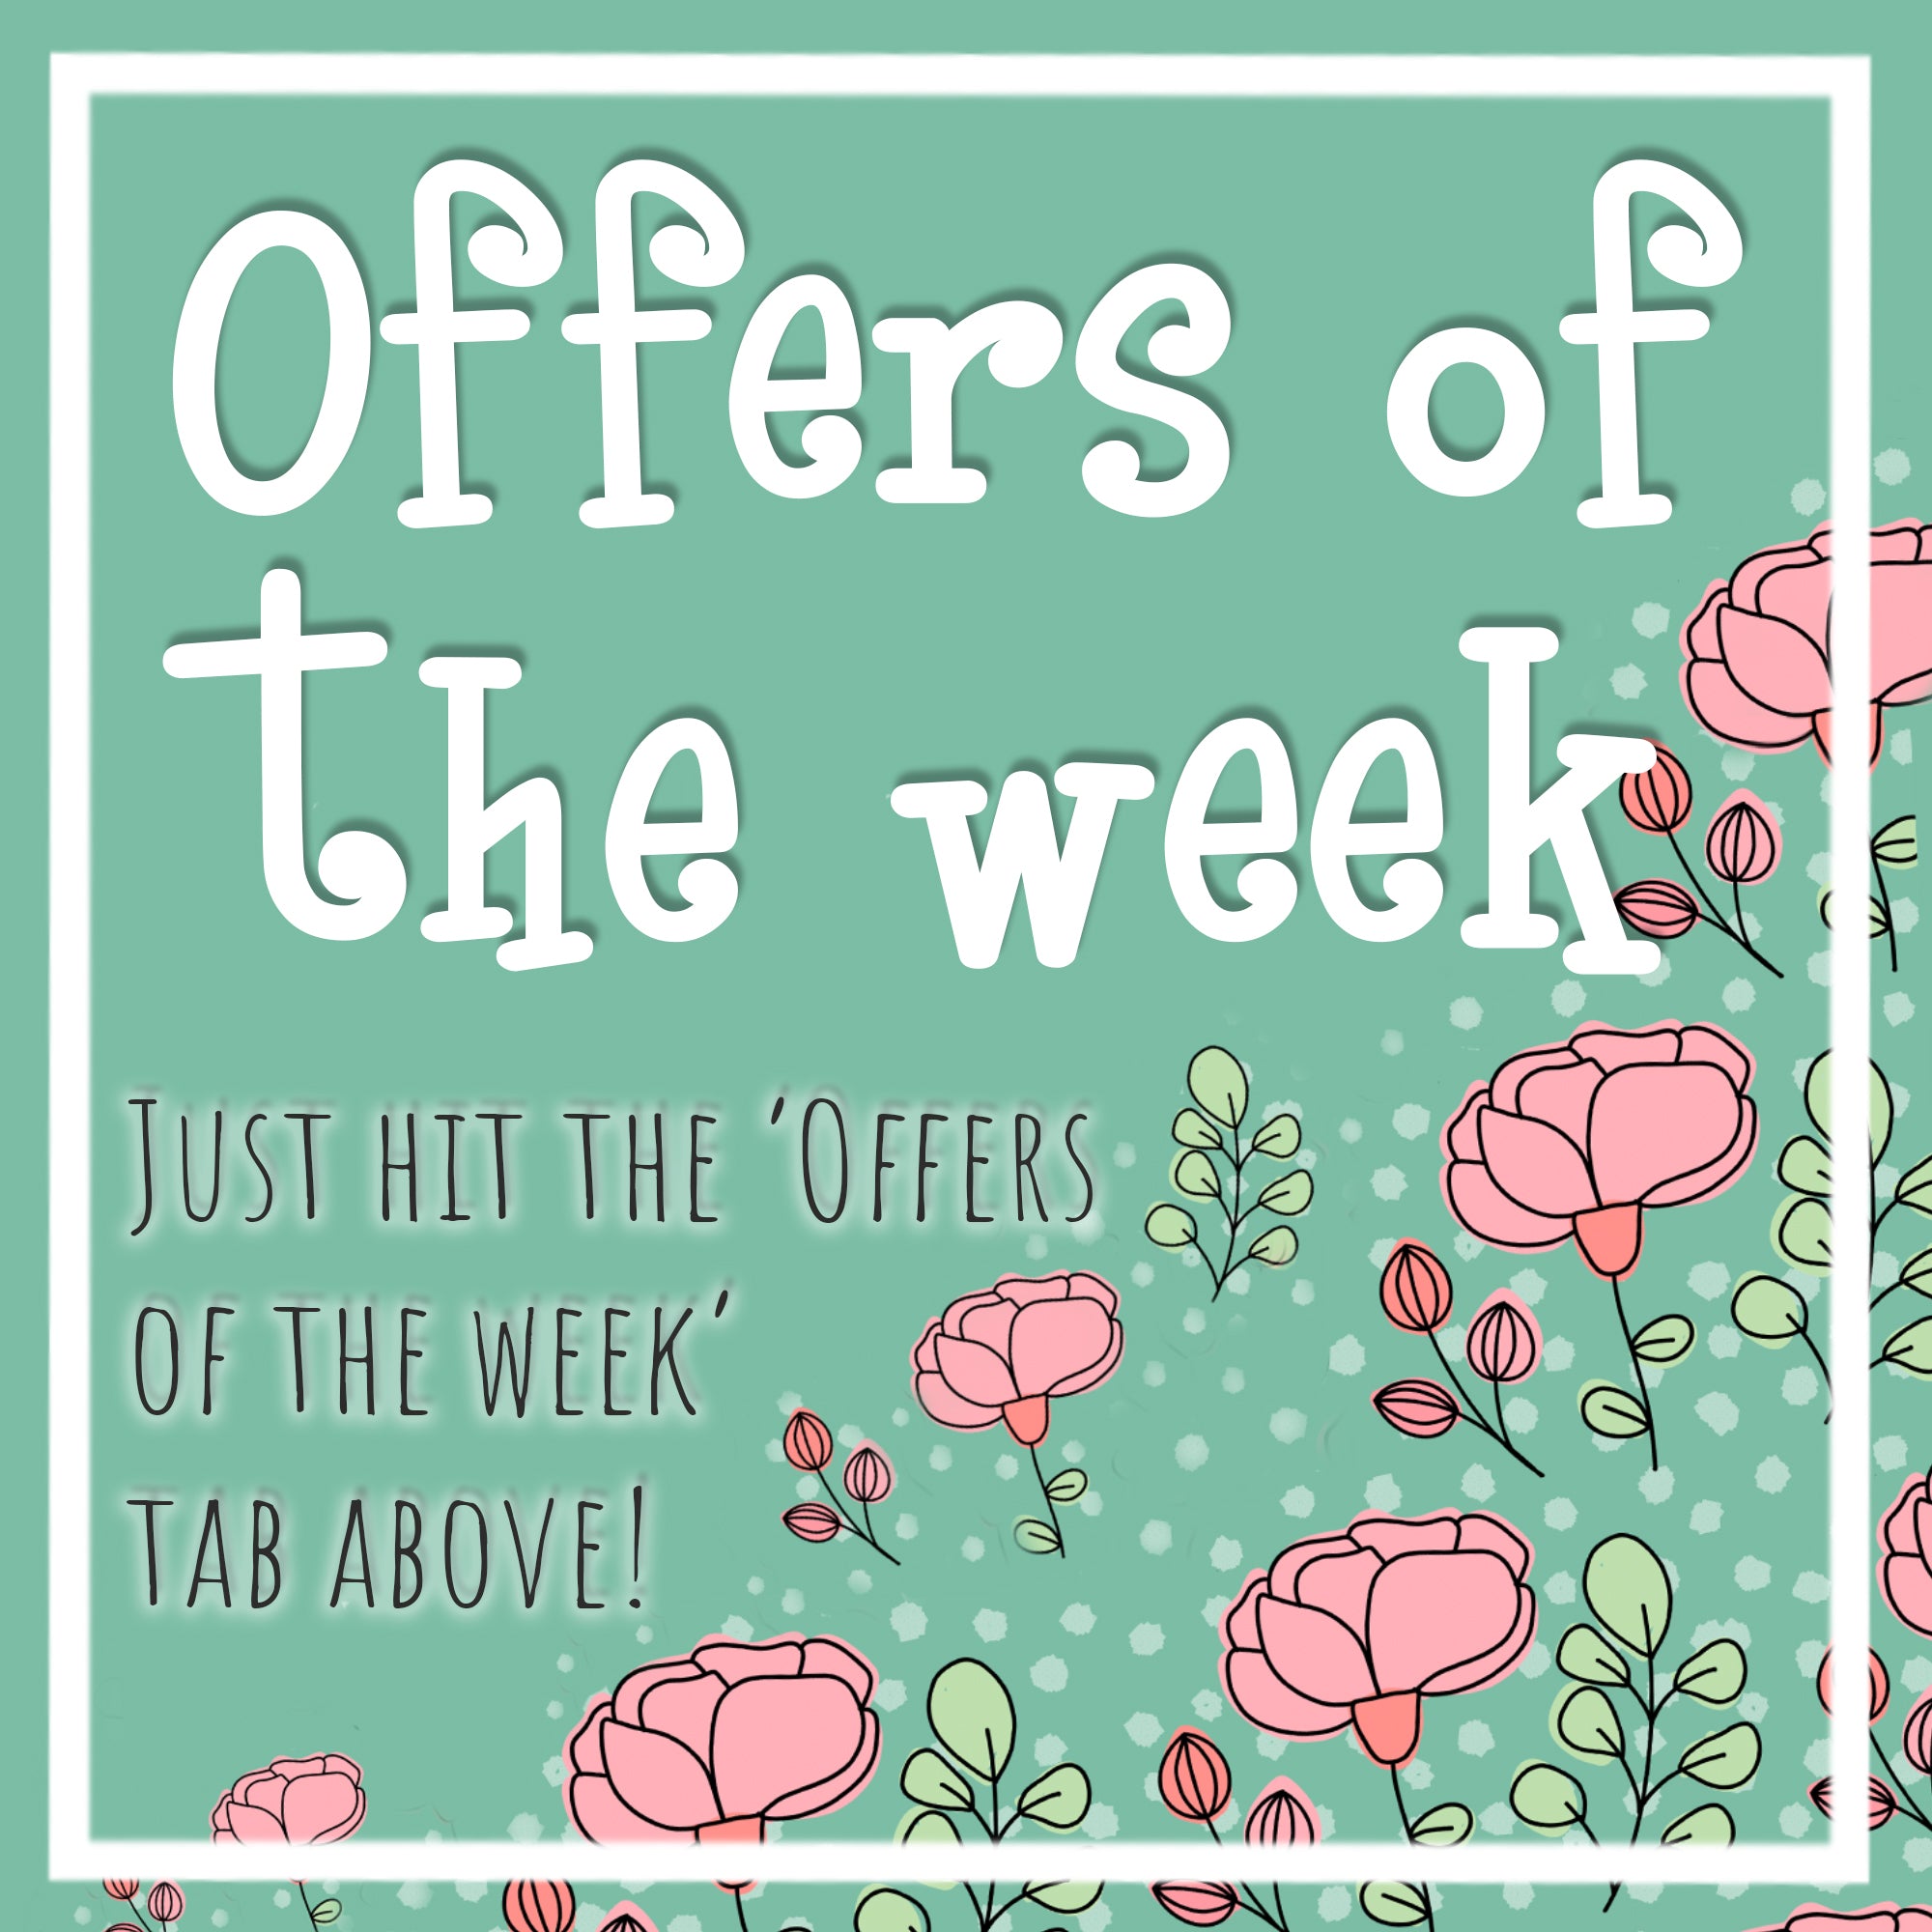 OFFERS OF THE WEEK!